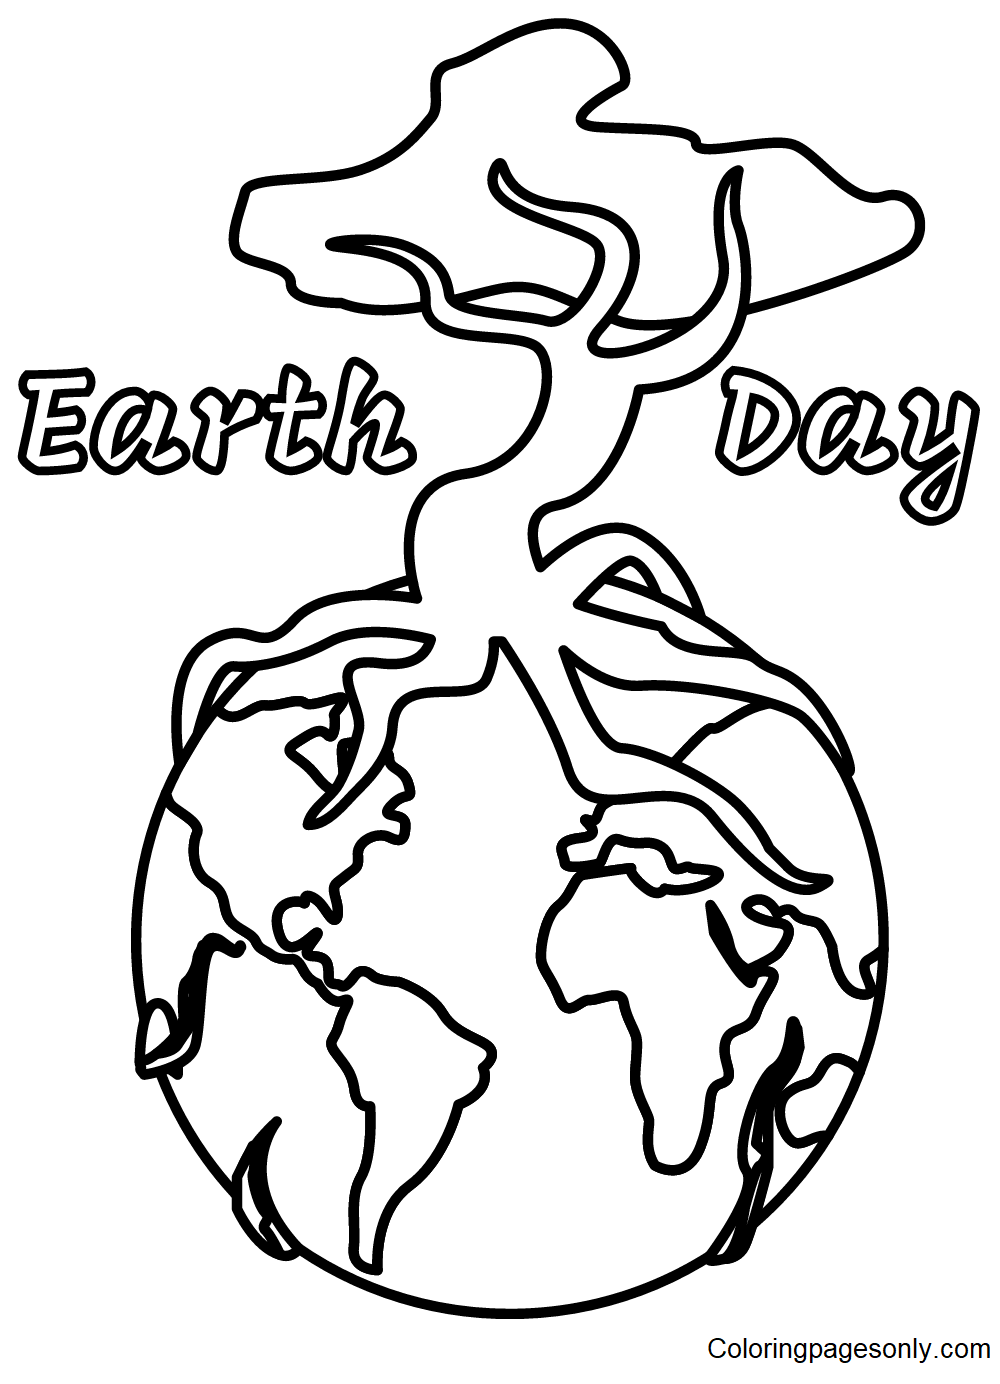 Earth Day color Sheets Coloring Pages